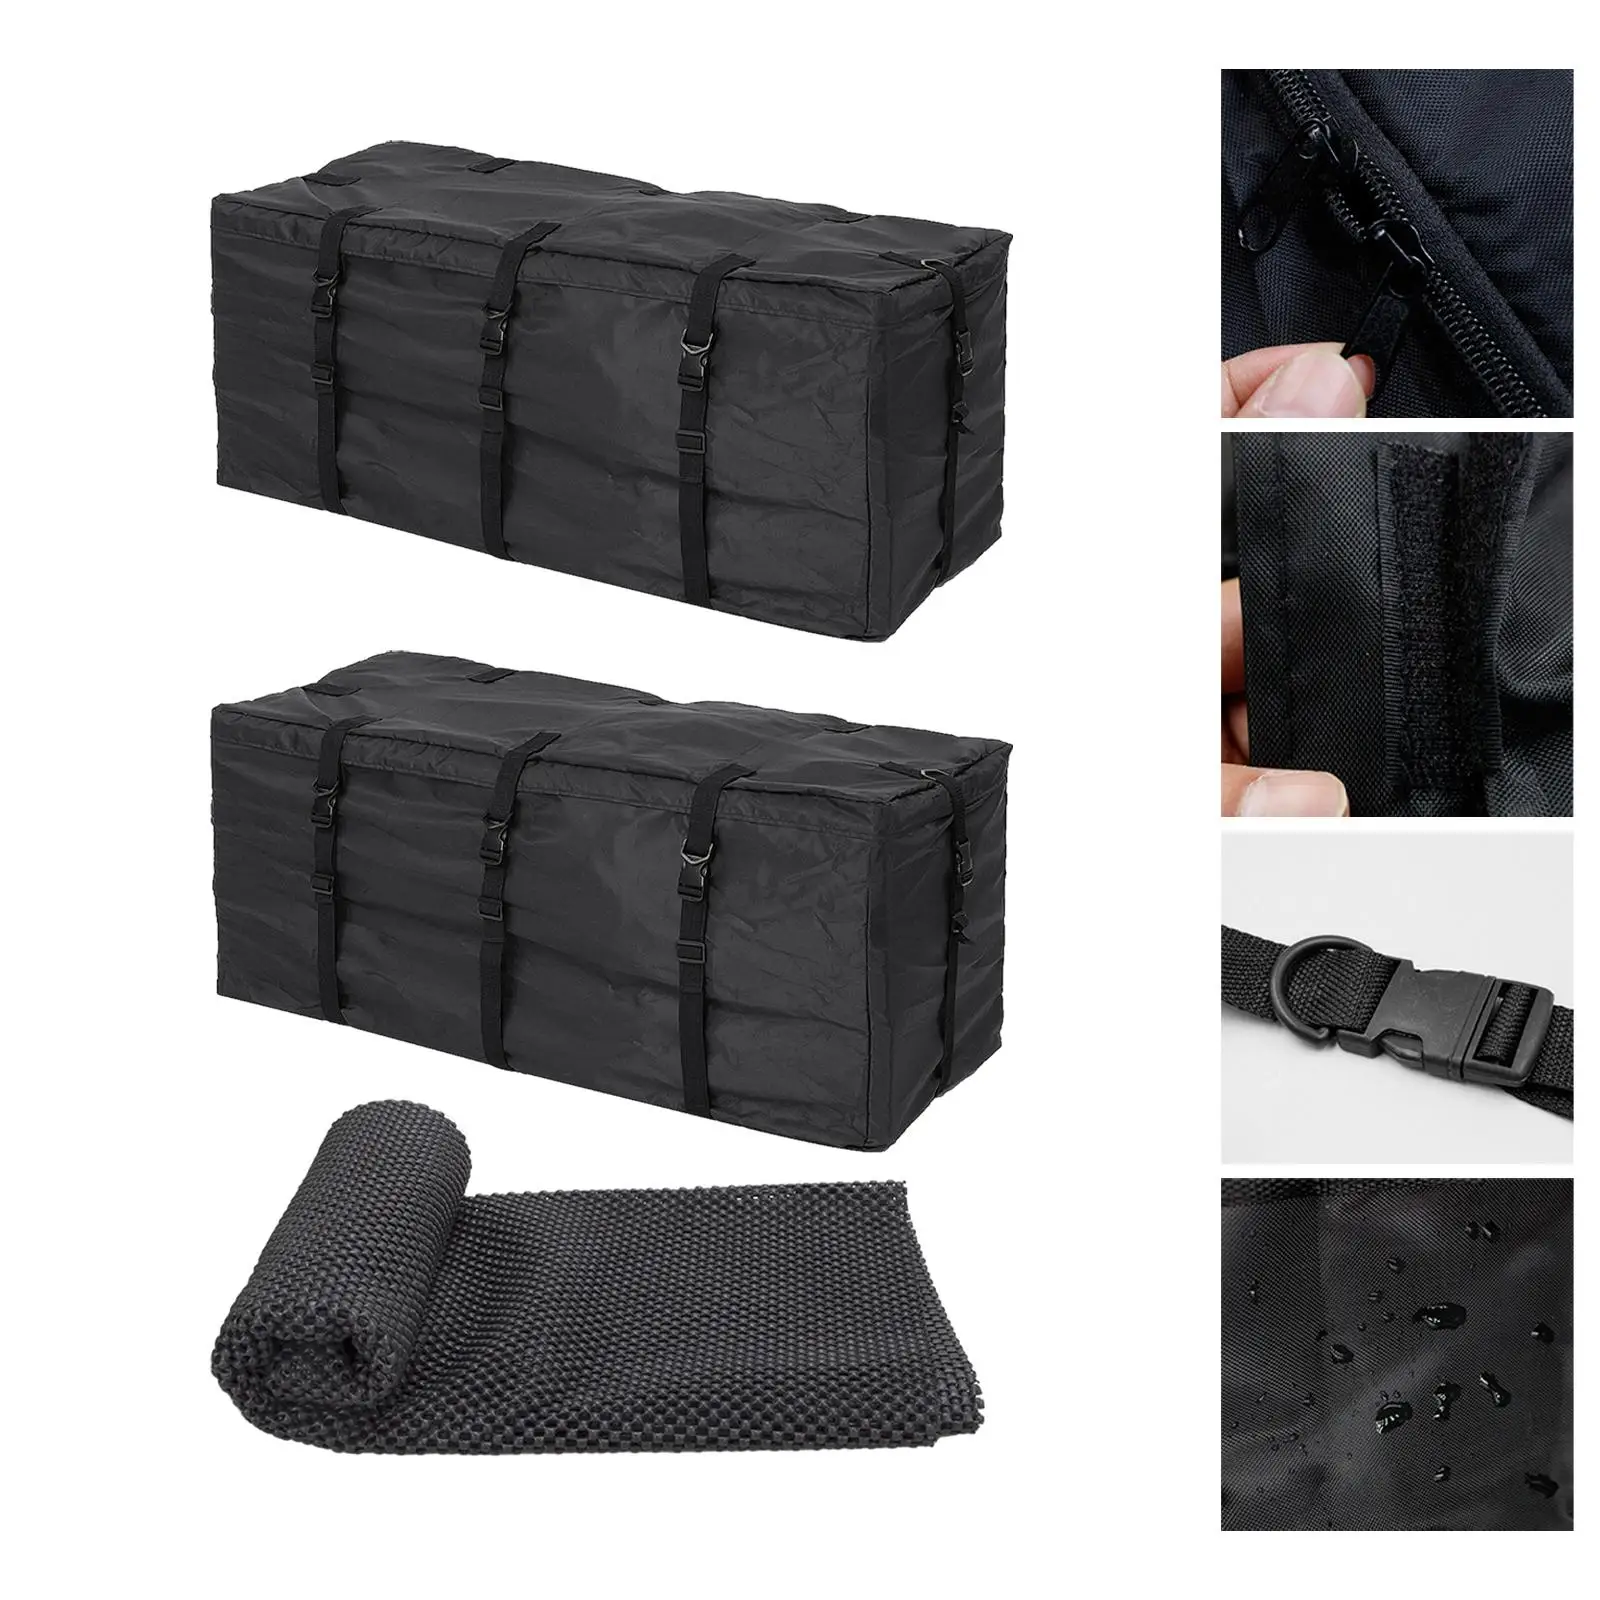 Rooftop Cargo Carrier Bag Luggage Storage Travel Accessories Durable Waterproof Rooftop Carrier Bag for Cars Vehicles SUV